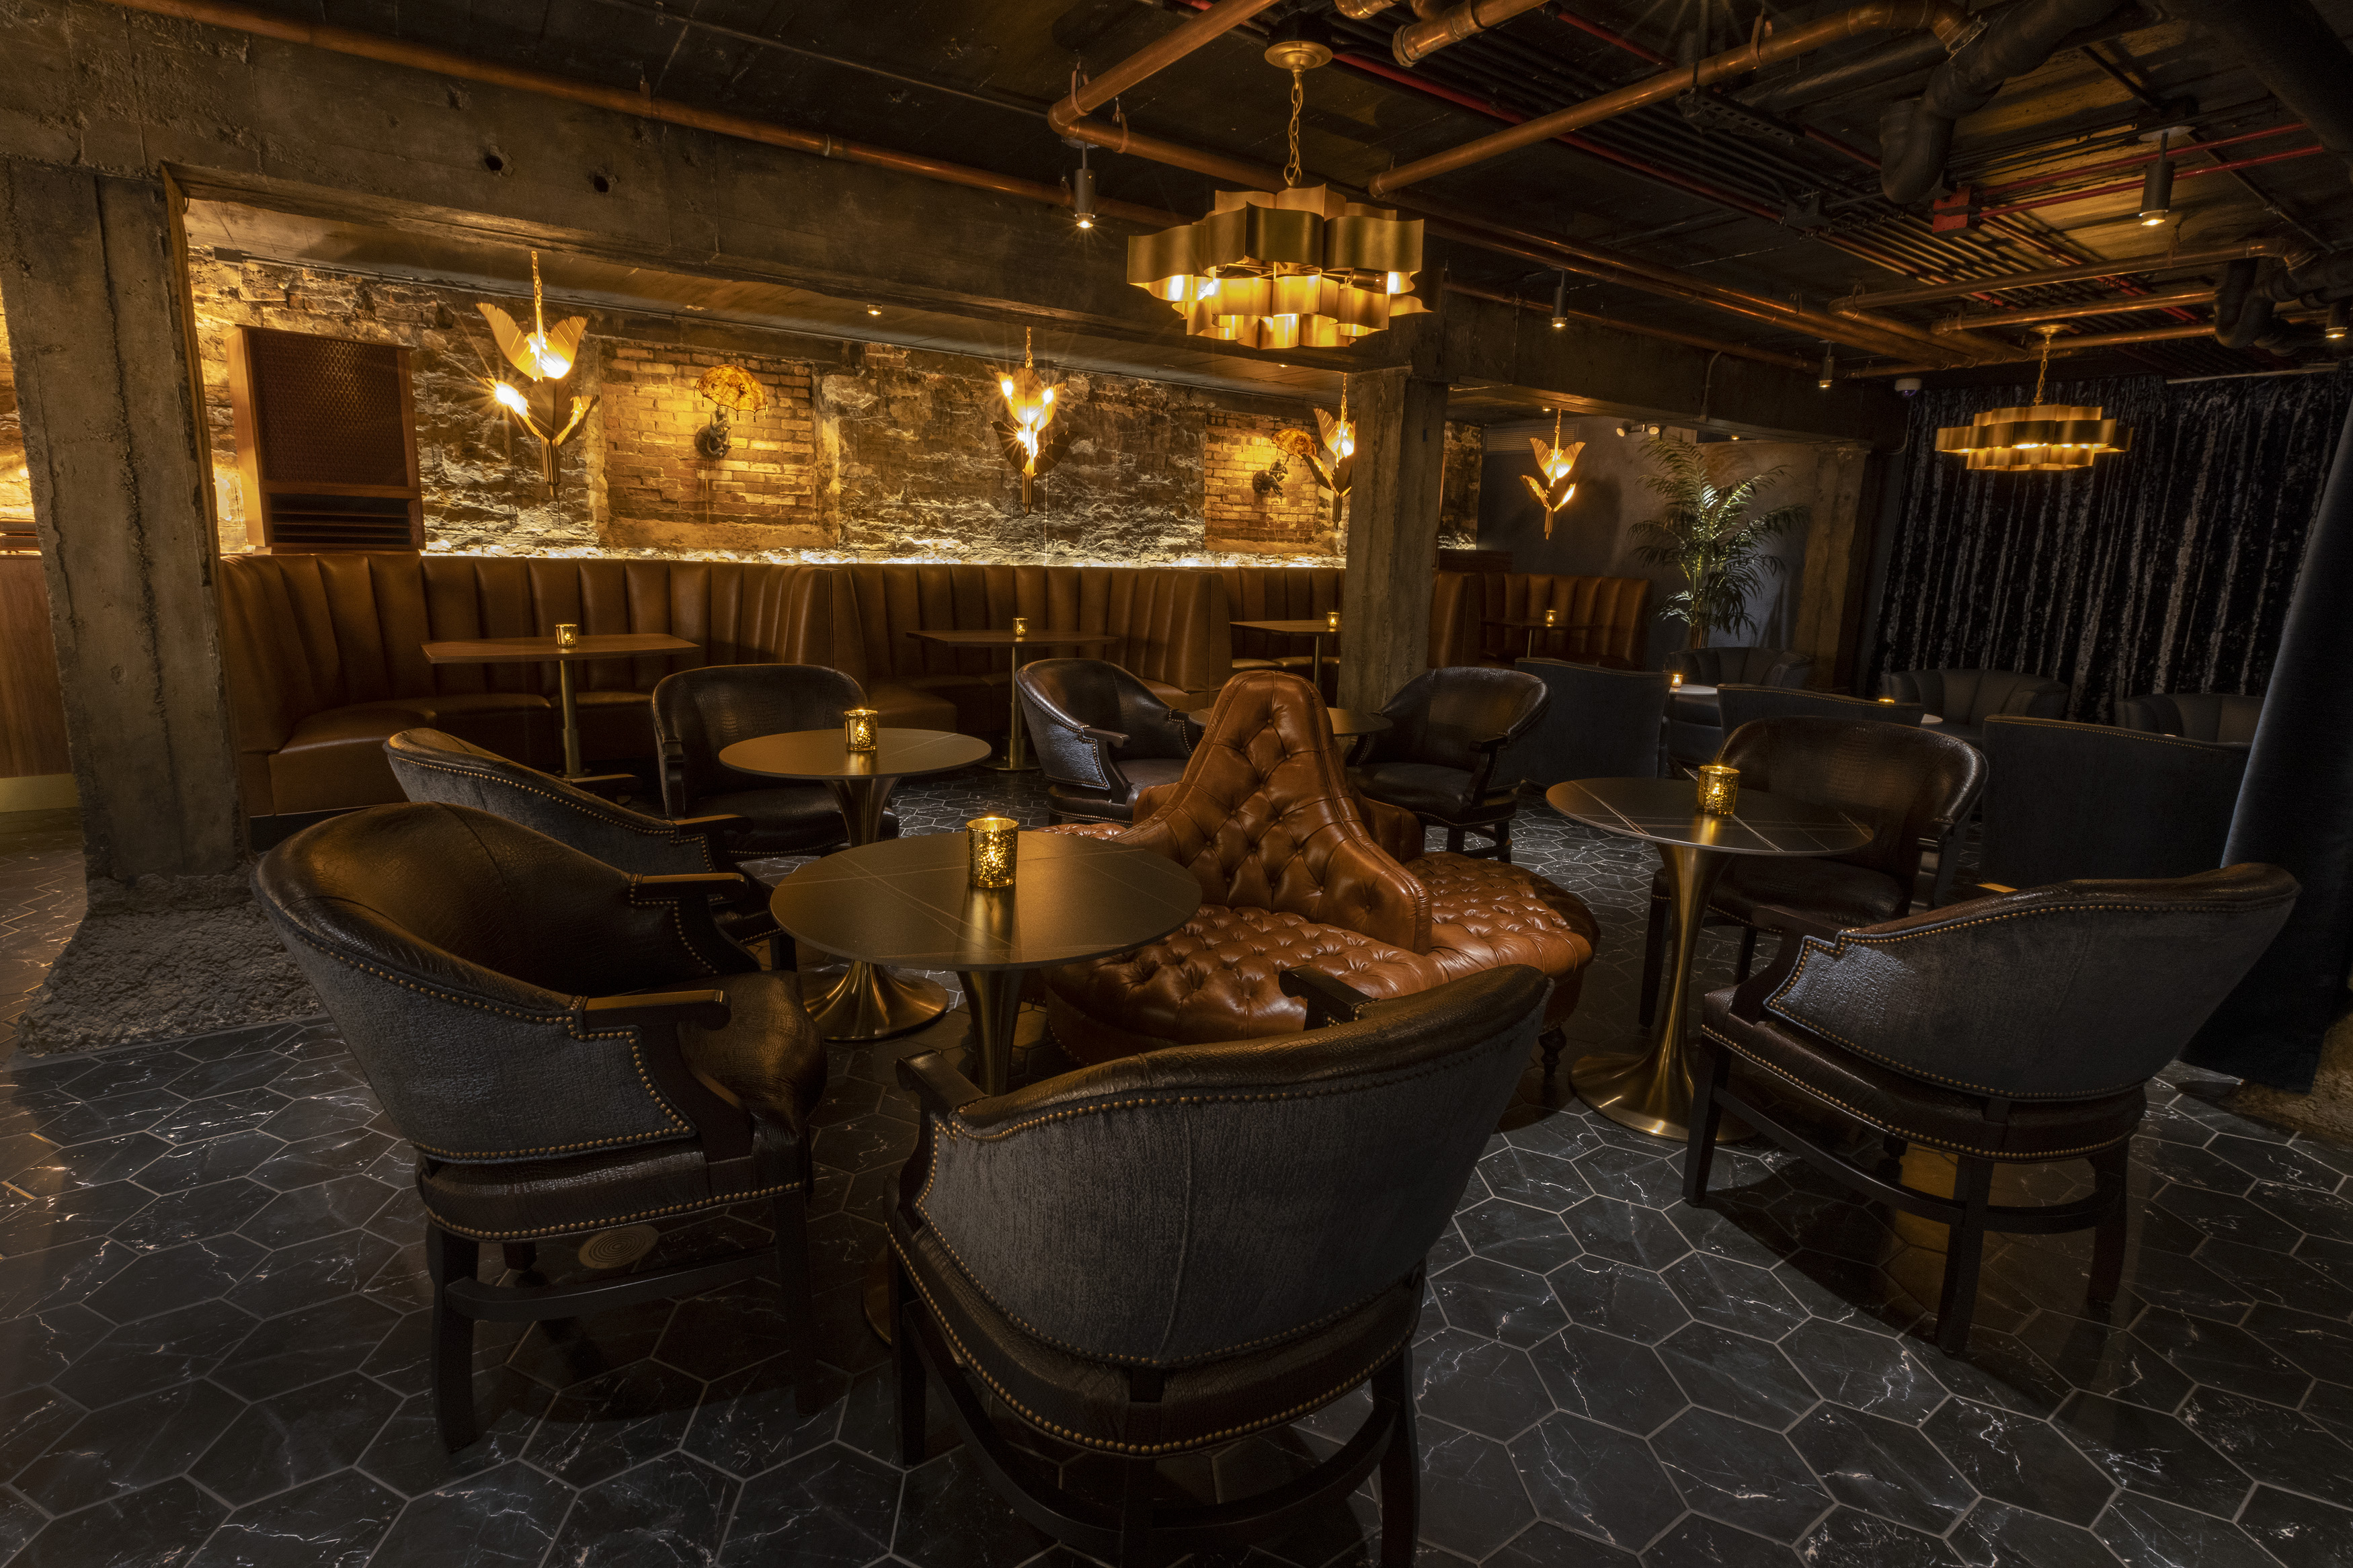 A low-lit speakeasy-style bar filled with leather furniture.